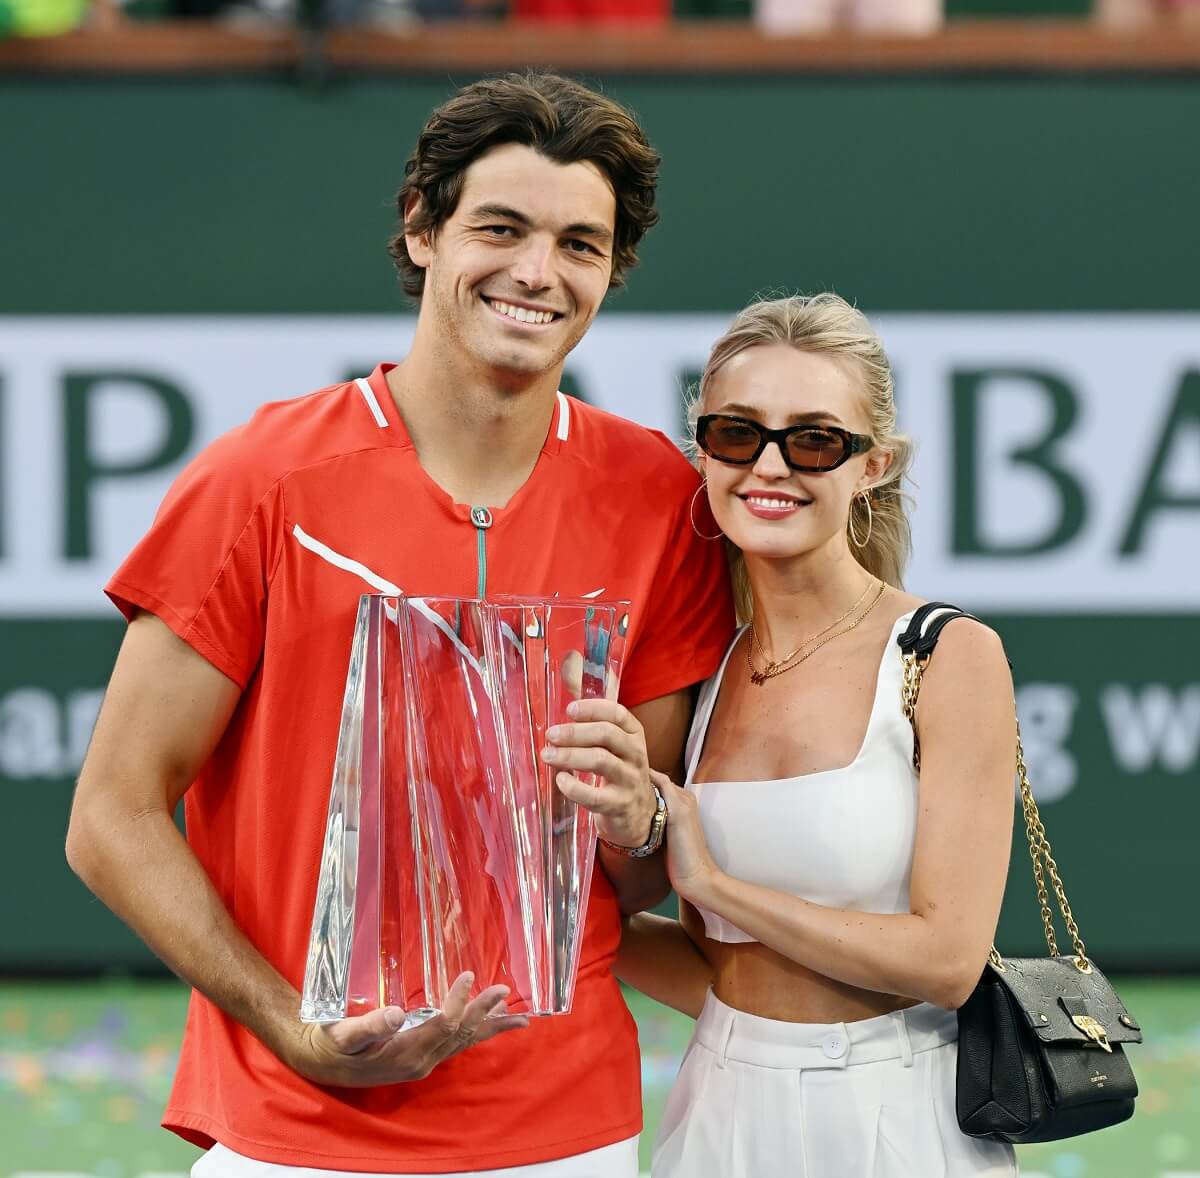 Taylor Fritz hold the championship trophy with girlfriend Morgan Riddle after winning a finals tennis match at the BNP Paribas Open